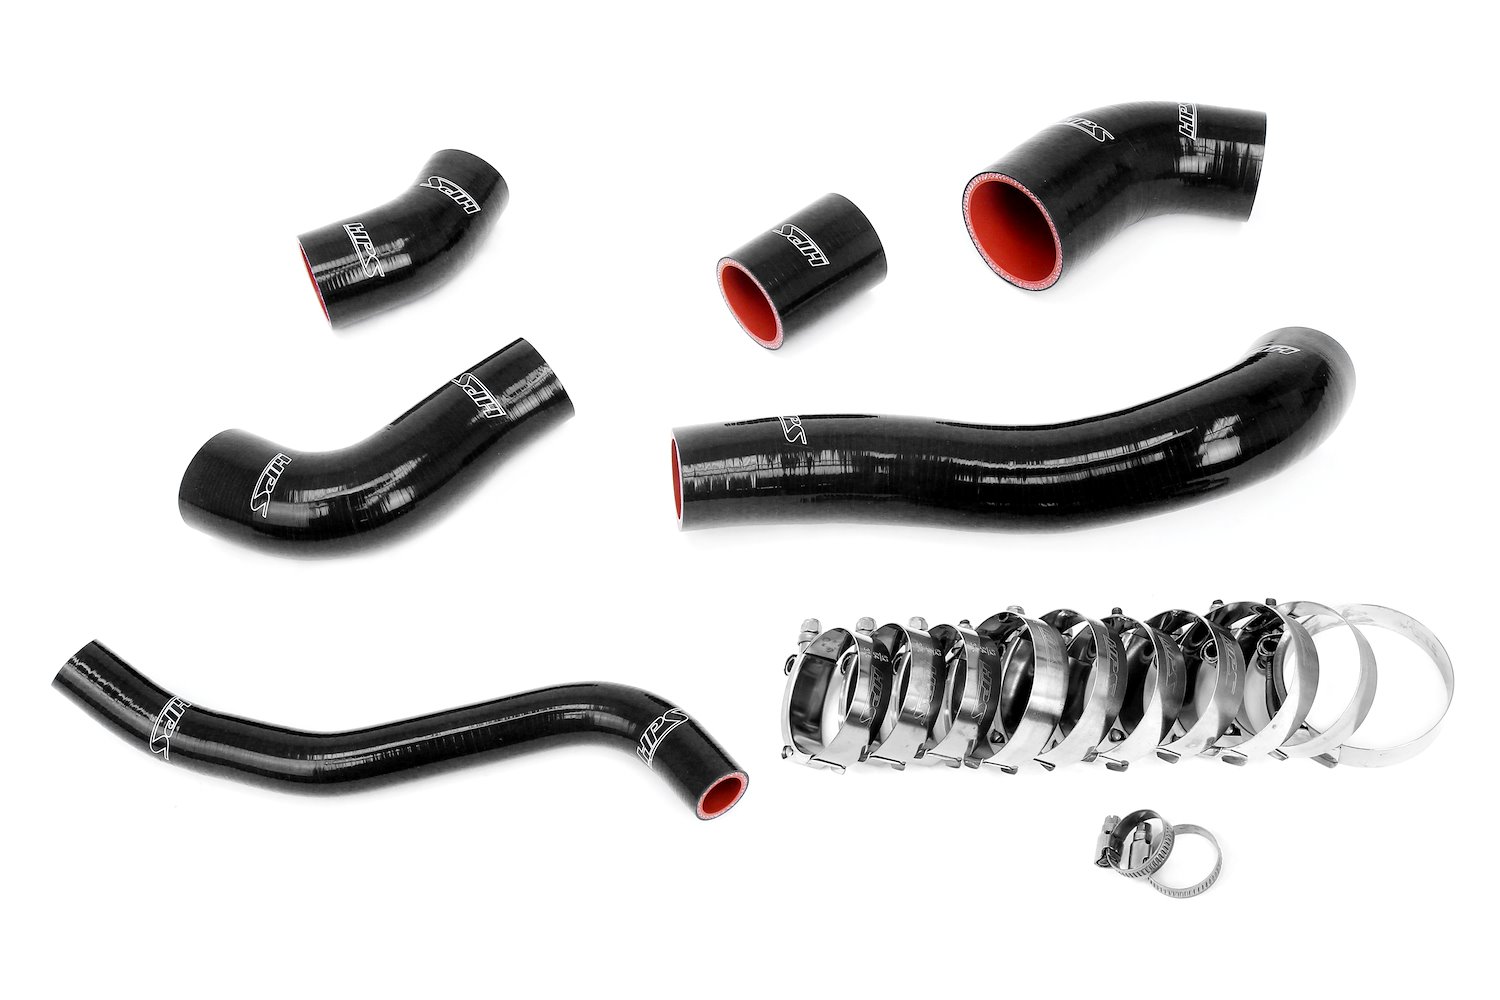 57-2003-BLK Intercooler Hose Kit, 4-Ply Reinforced Silicone, Replaces Rubber Intercooler Hoses